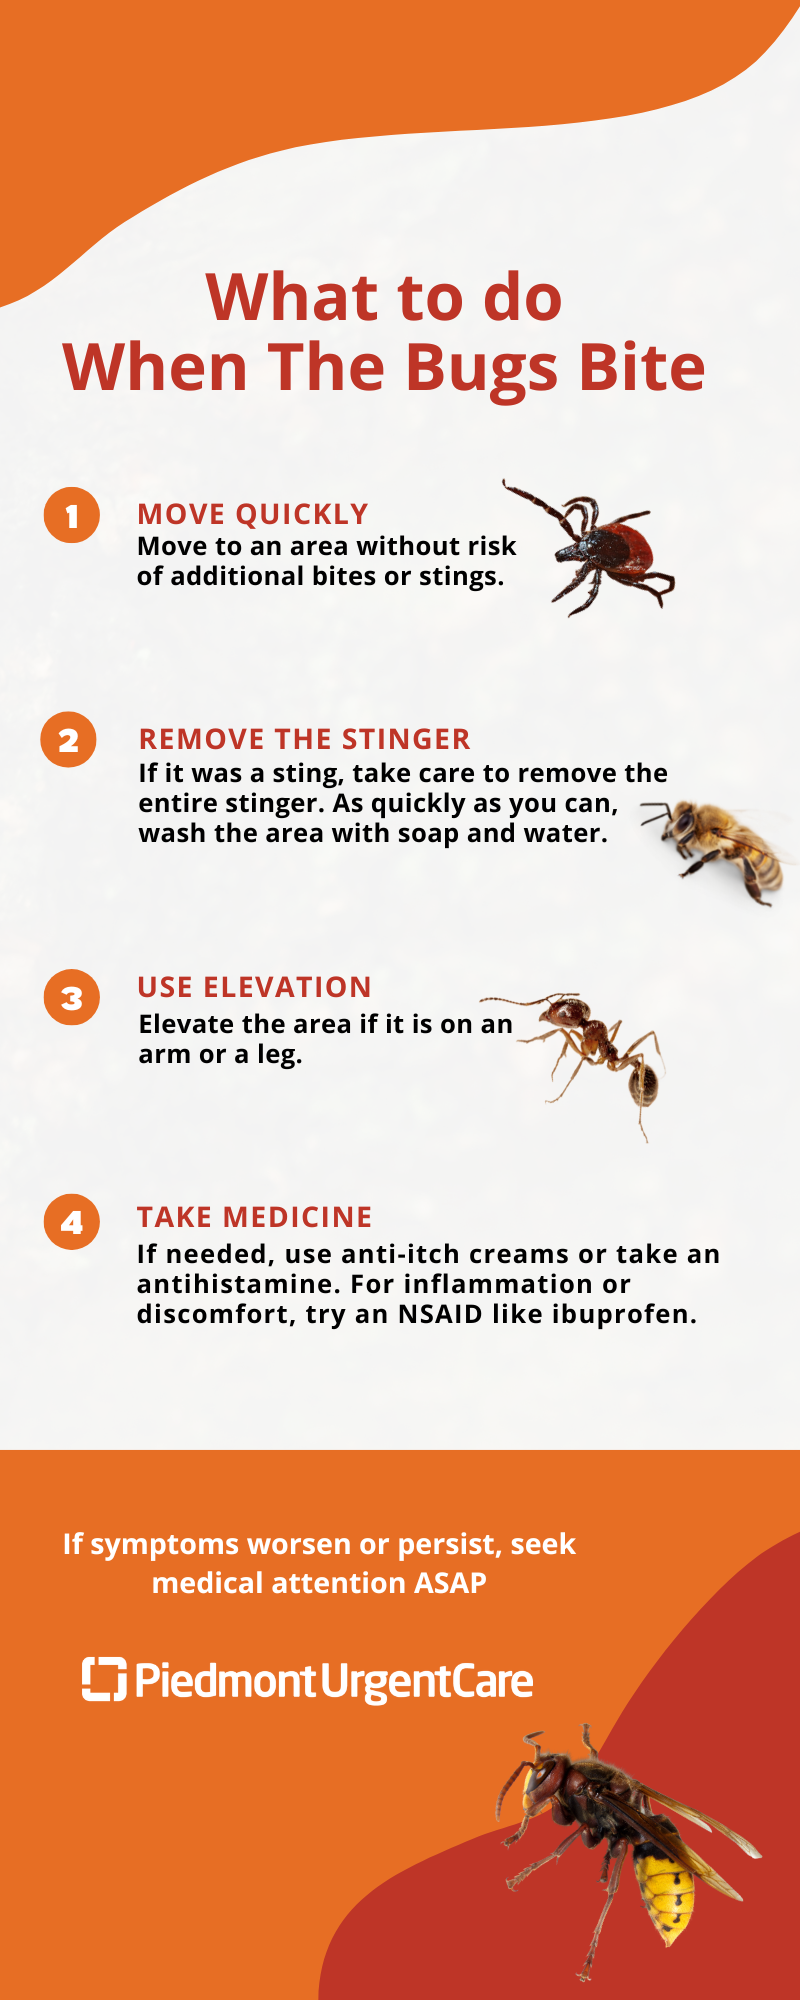 What to do When Bugs Bite